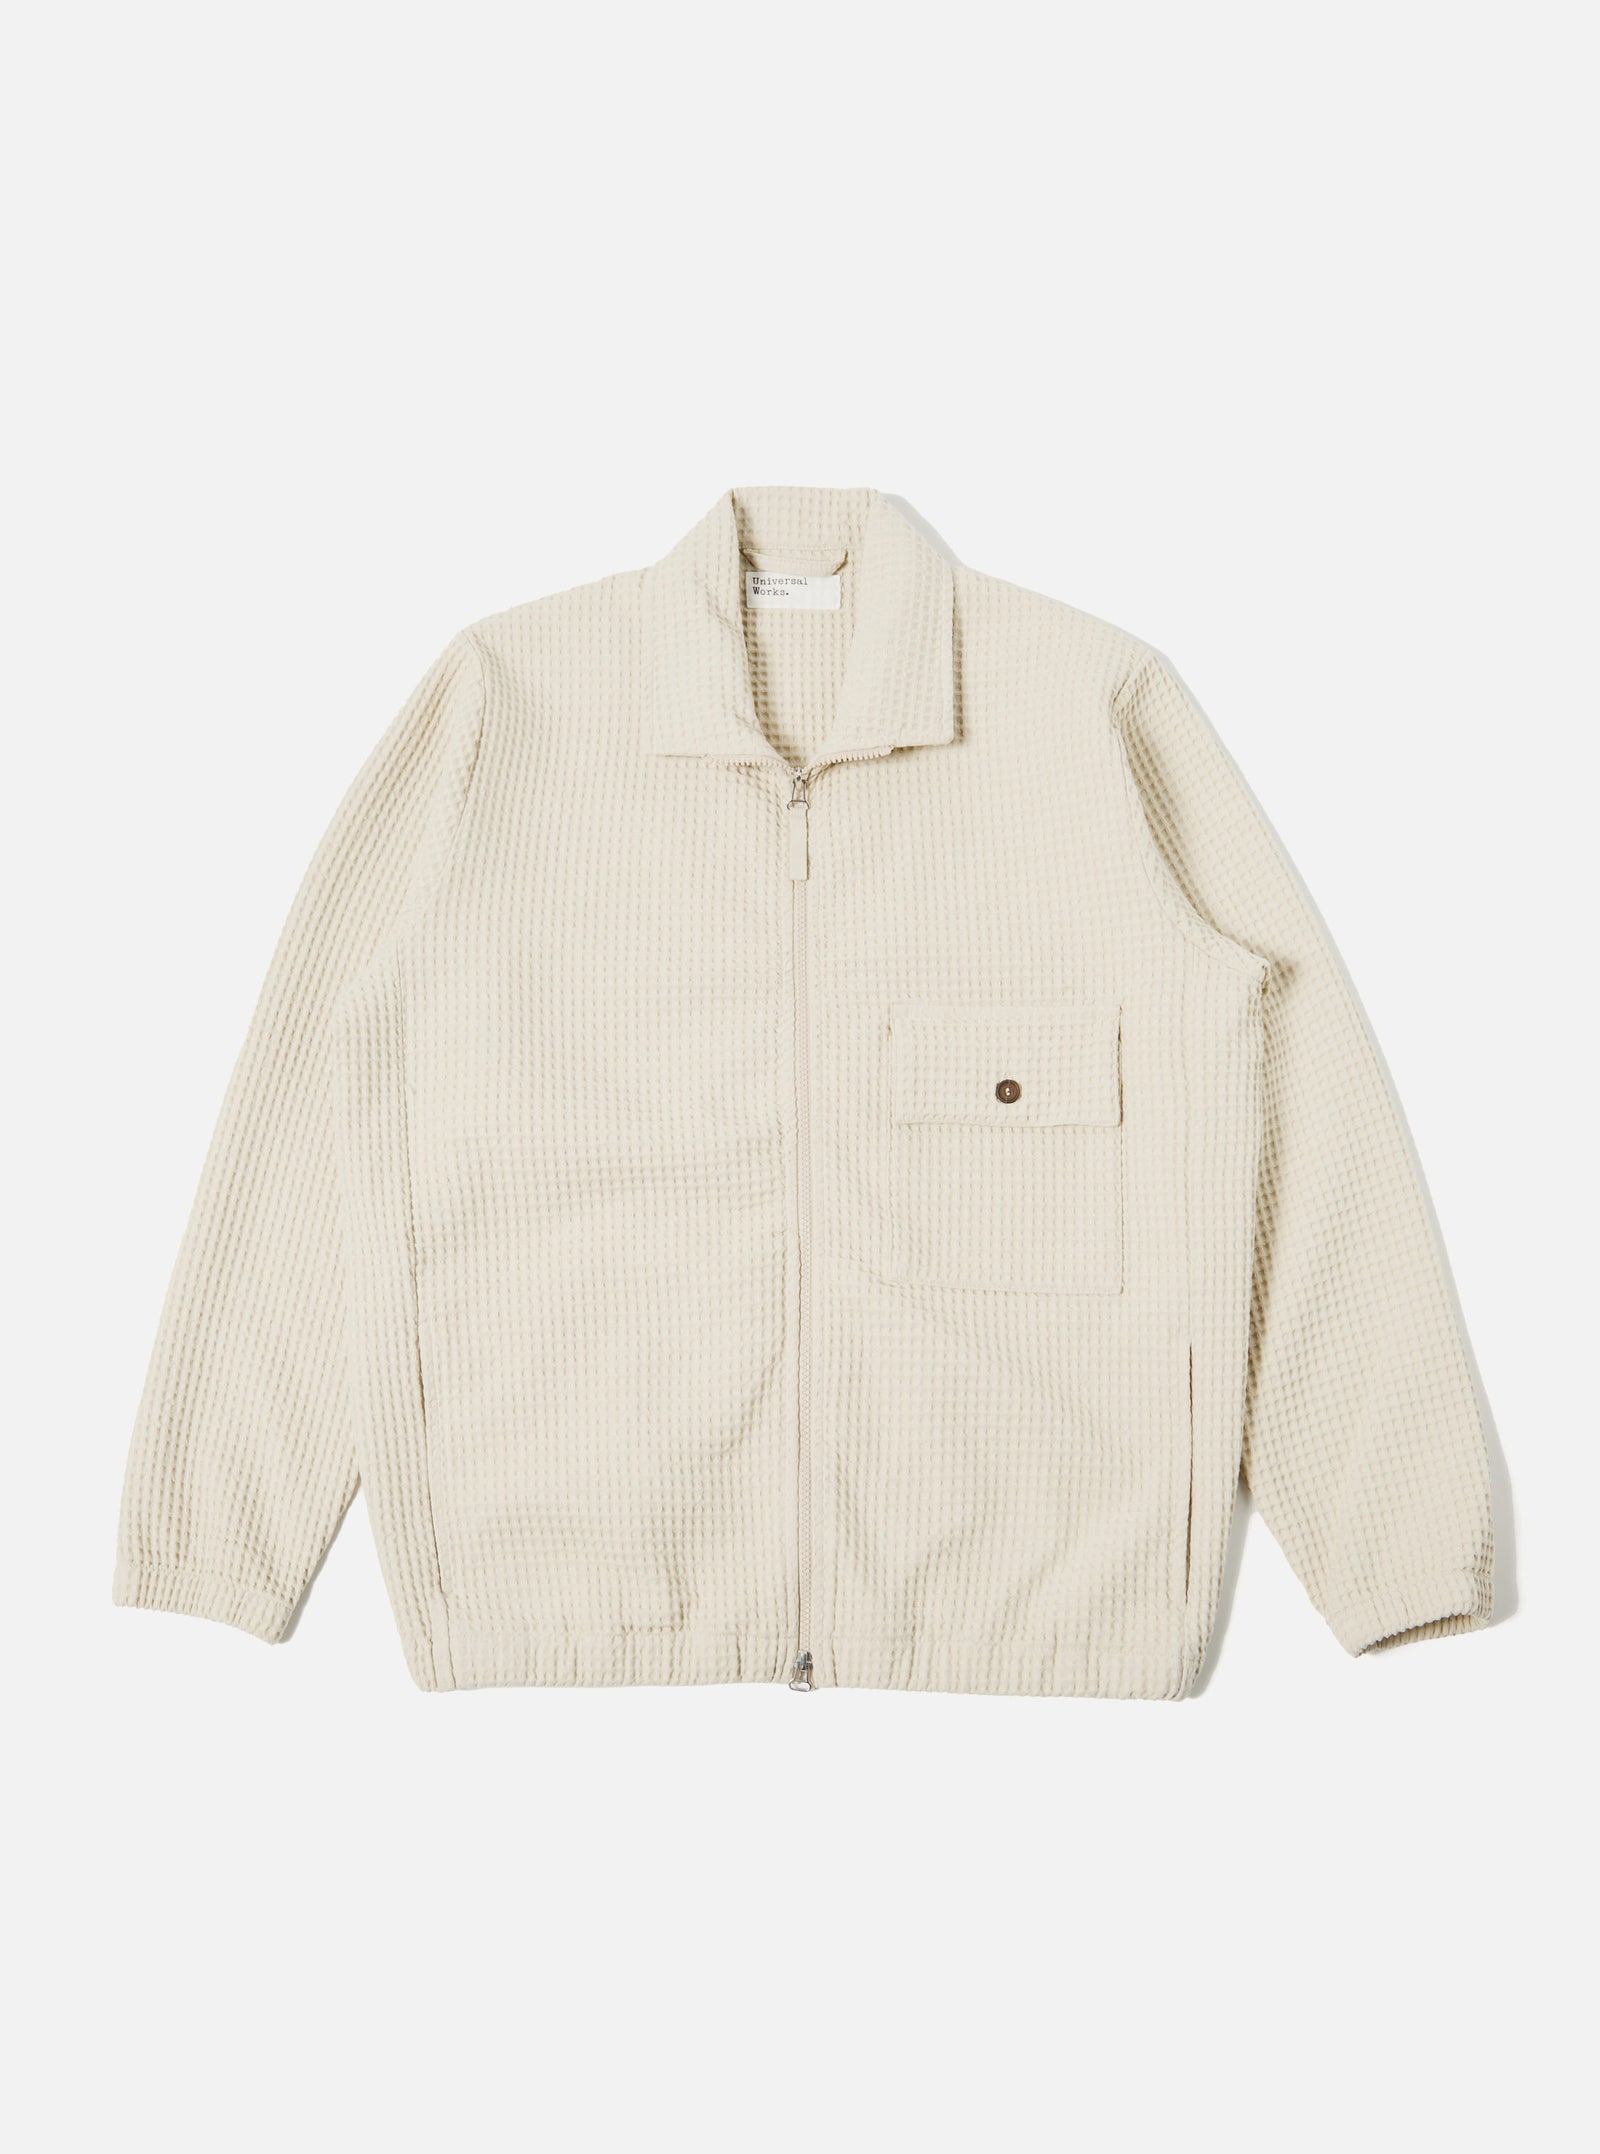 Universal Works K Track Top in Driftwood Pike Waffle